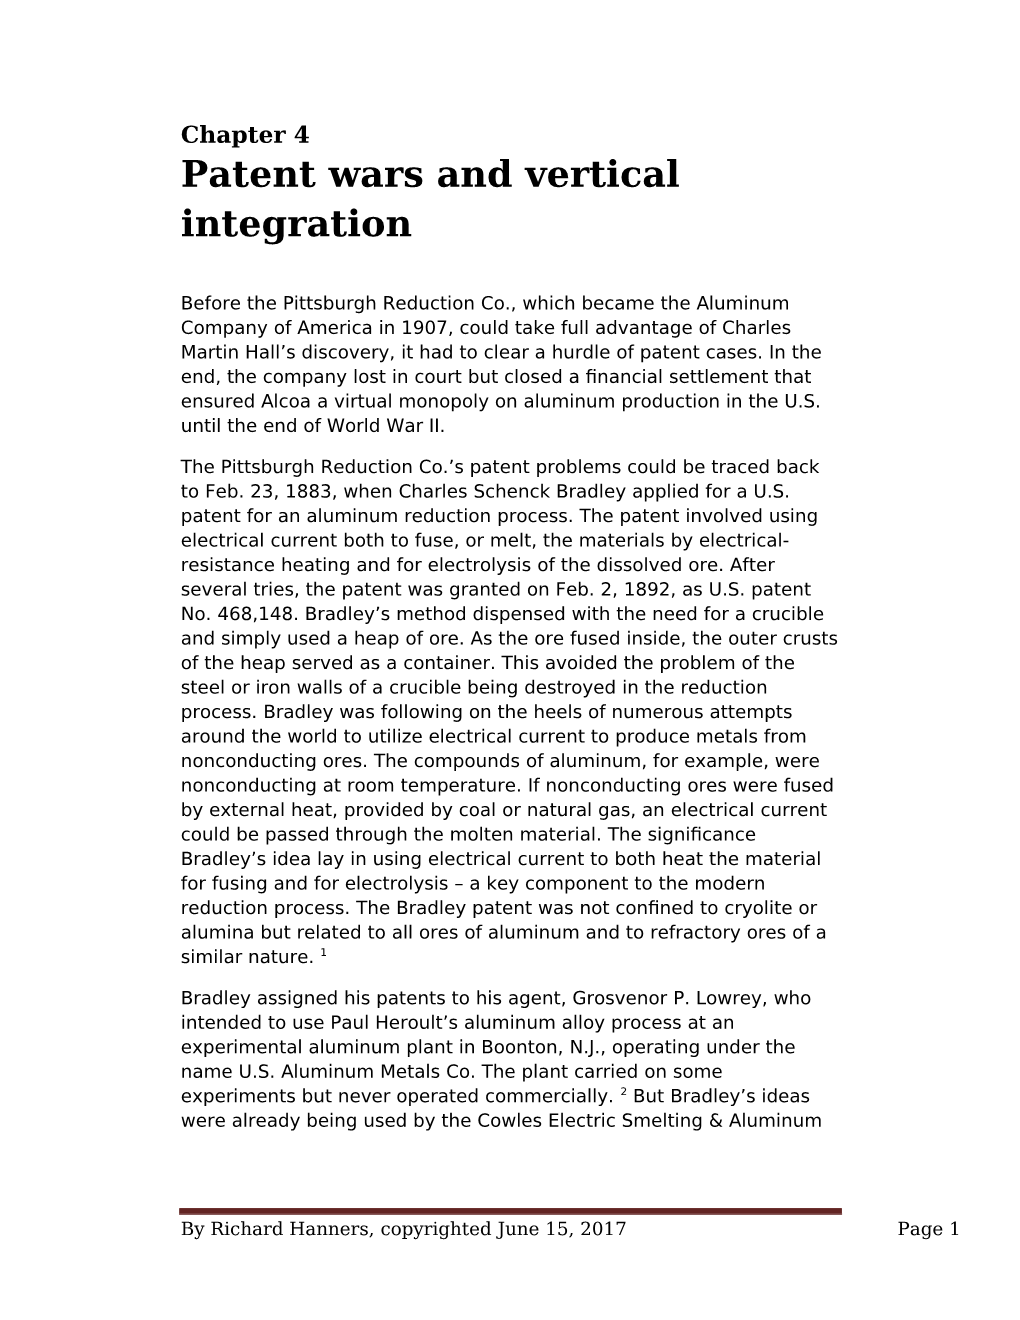 Chapter 4 – Patent Wars and Vertical Integration